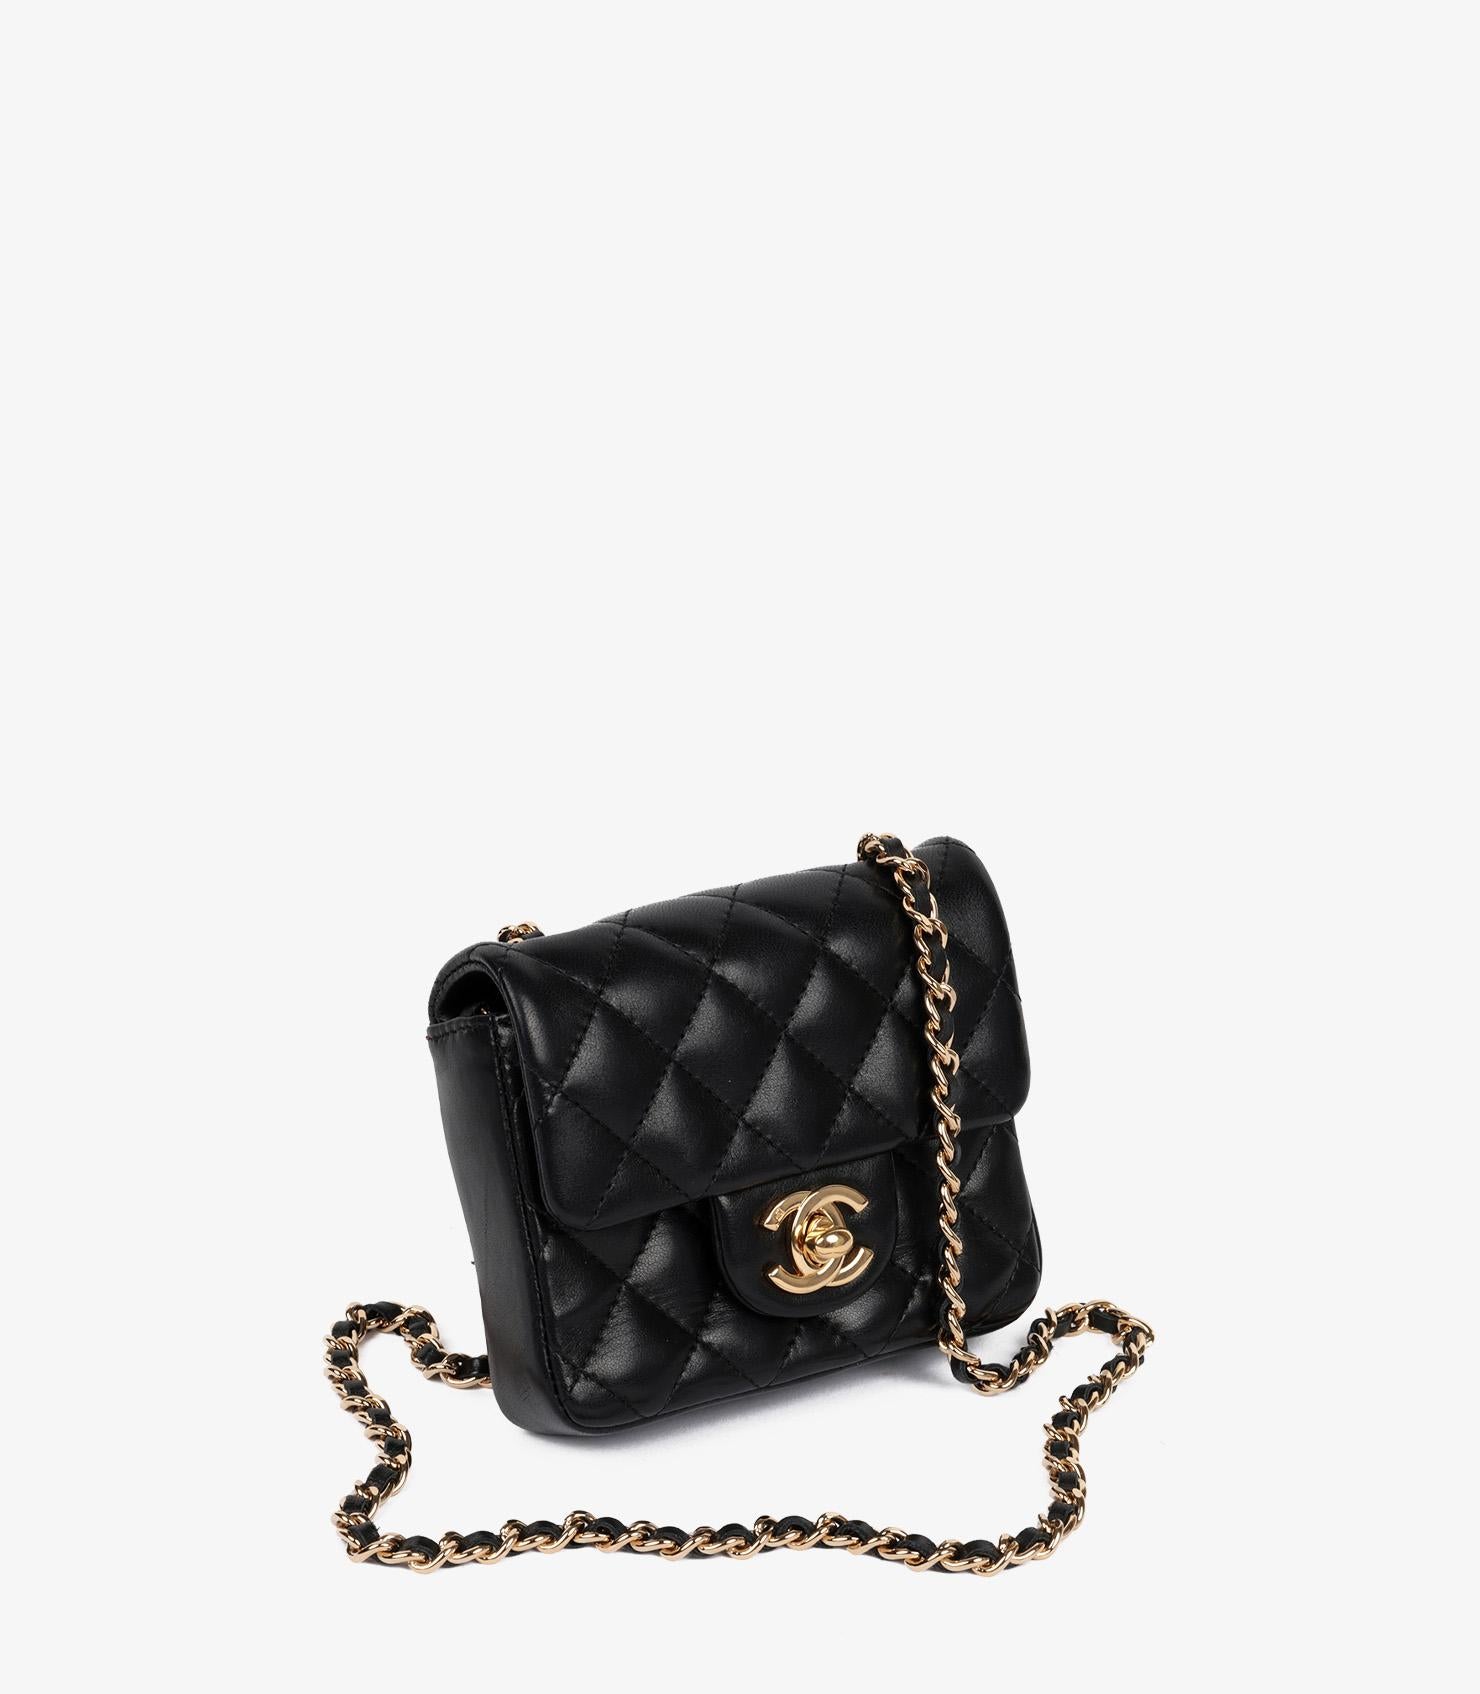 Chanel Black Quilted Lambskin Square Micro Flap Bag In Excellent Condition For Sale In Bishop's Stortford, Hertfordshire